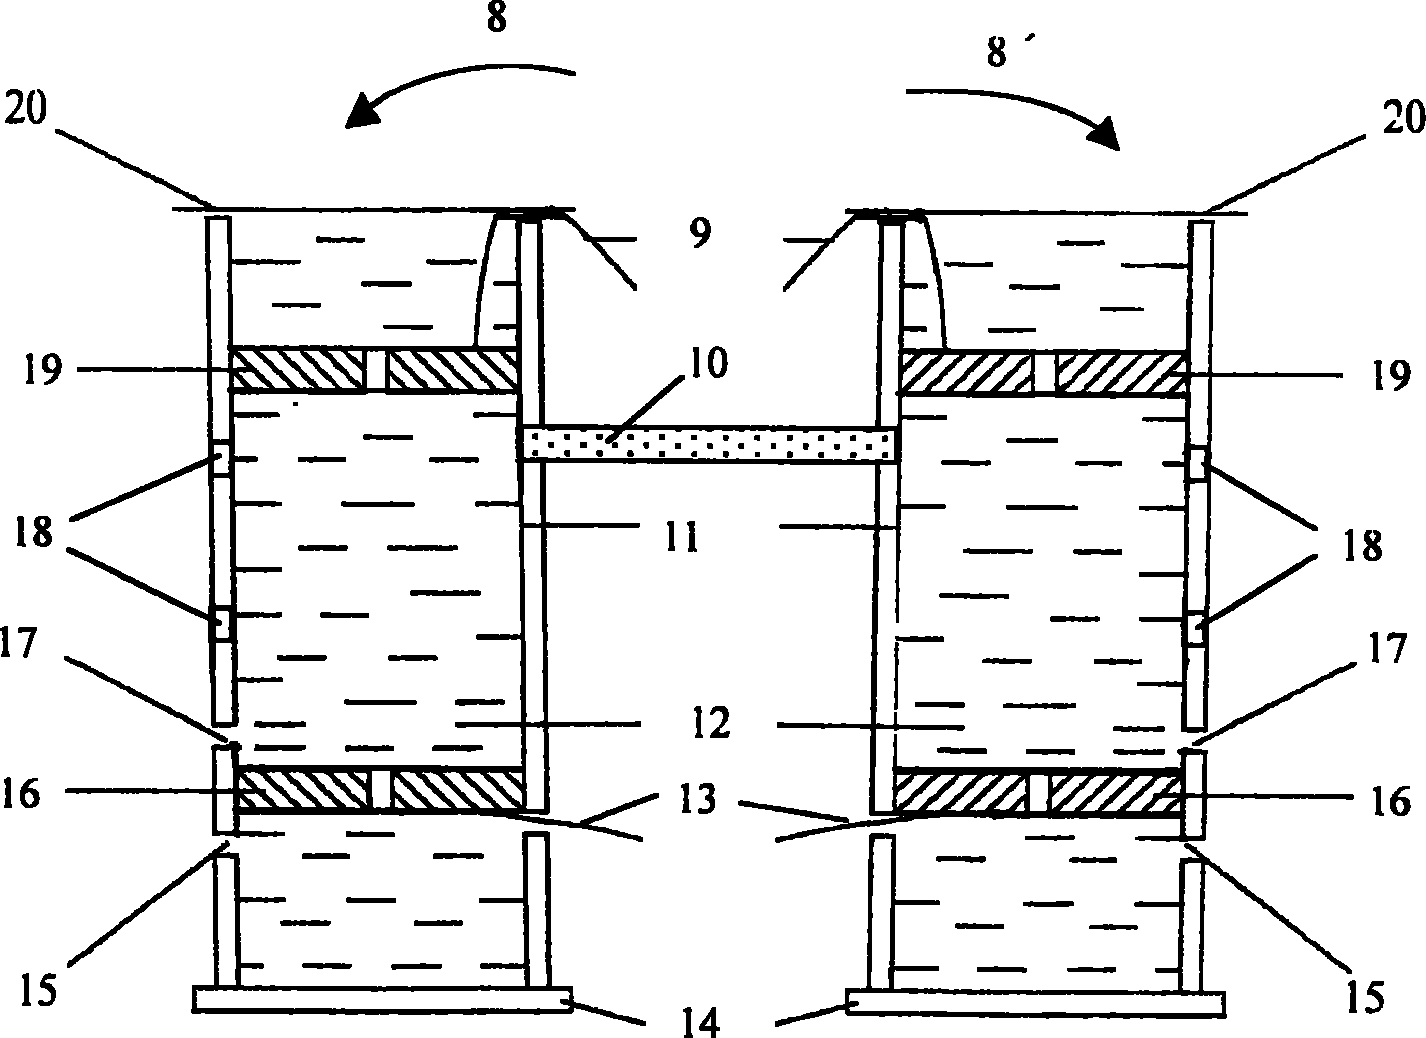 Soil erosion researching device